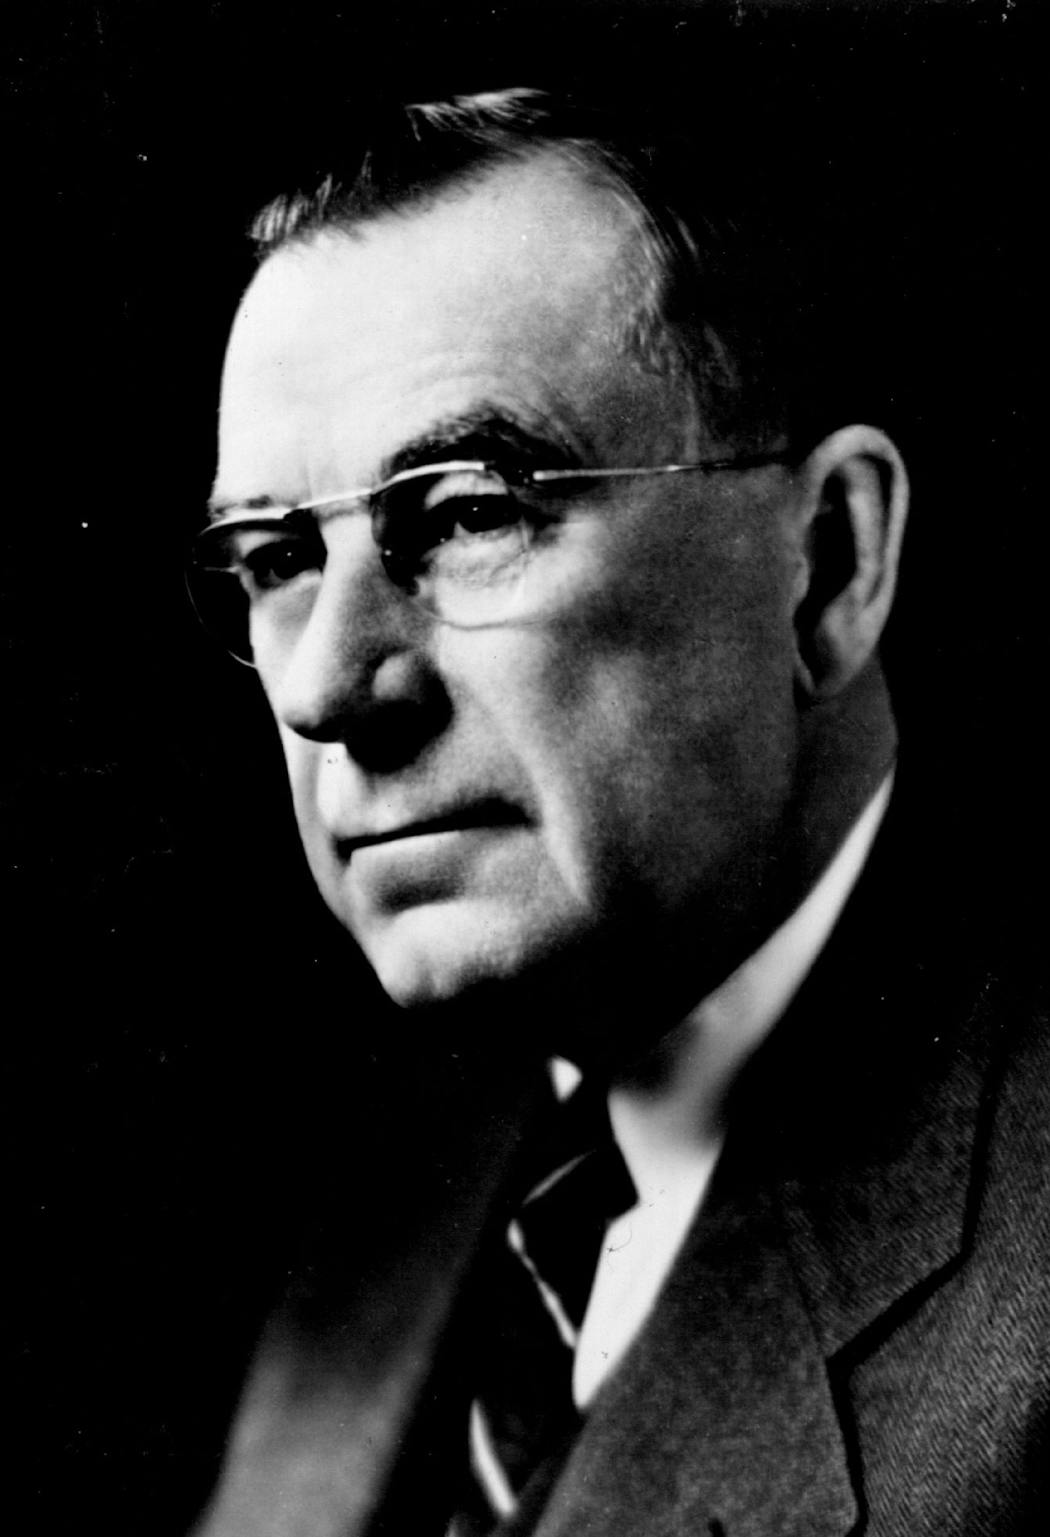 William L. McKnight, longtime president and chairman of the board for Minnesota Mining and Manufacturing Co.